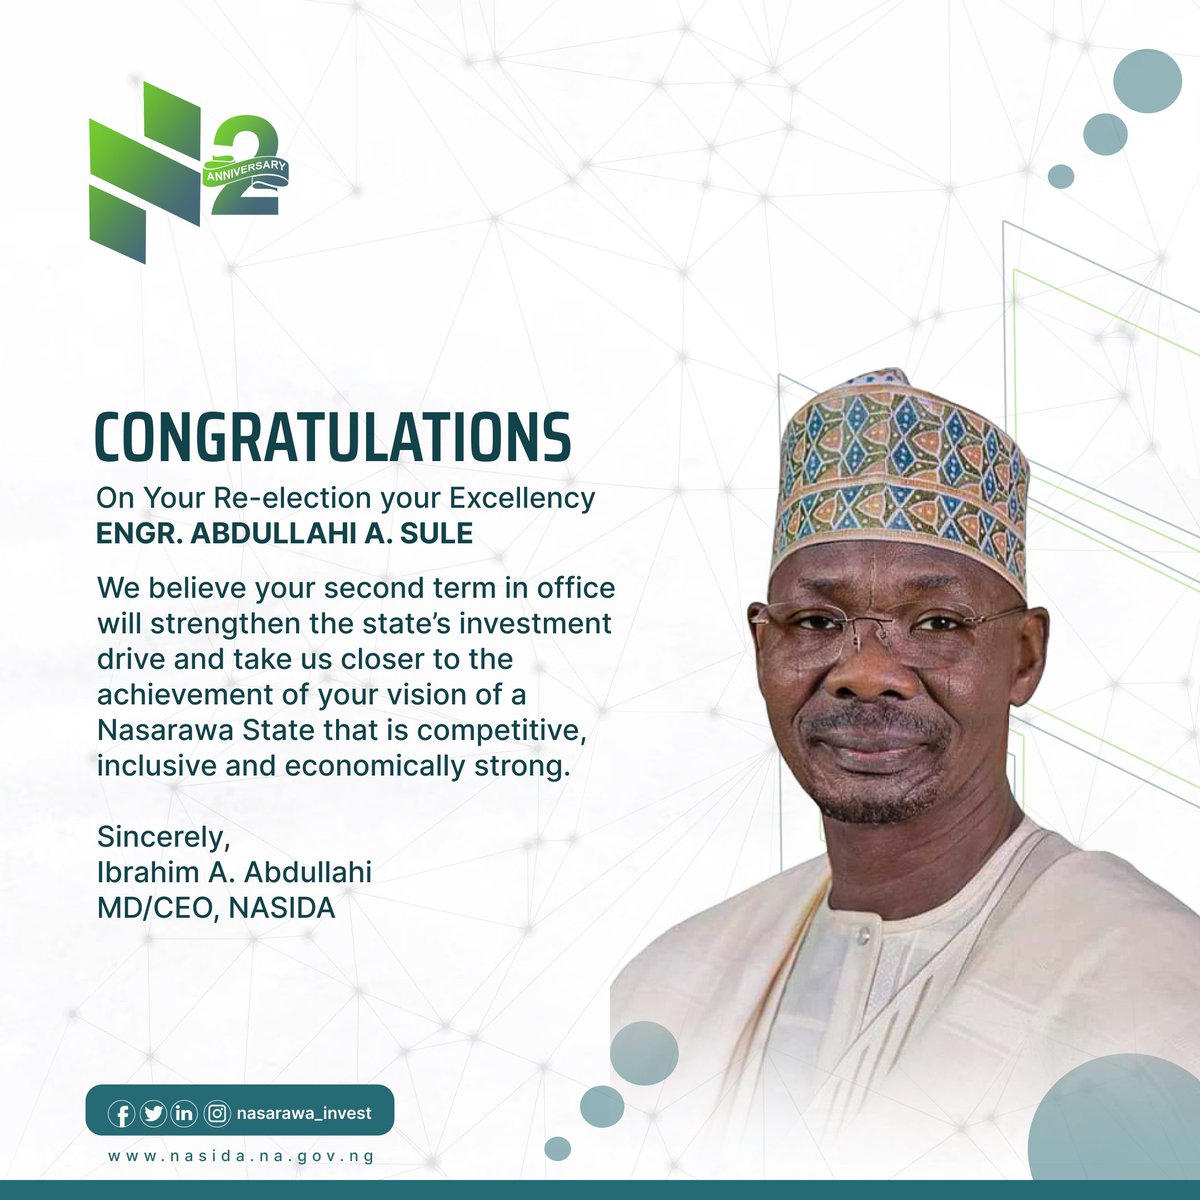 Congratulations your Excellency, Engineer Abdullahi Sule on your re-election as governor of Nasarawa state. 

#Nasarawameansbusiness 
#Nasarawaeconomicanddevelopmentstrategy 
#nasarawastate